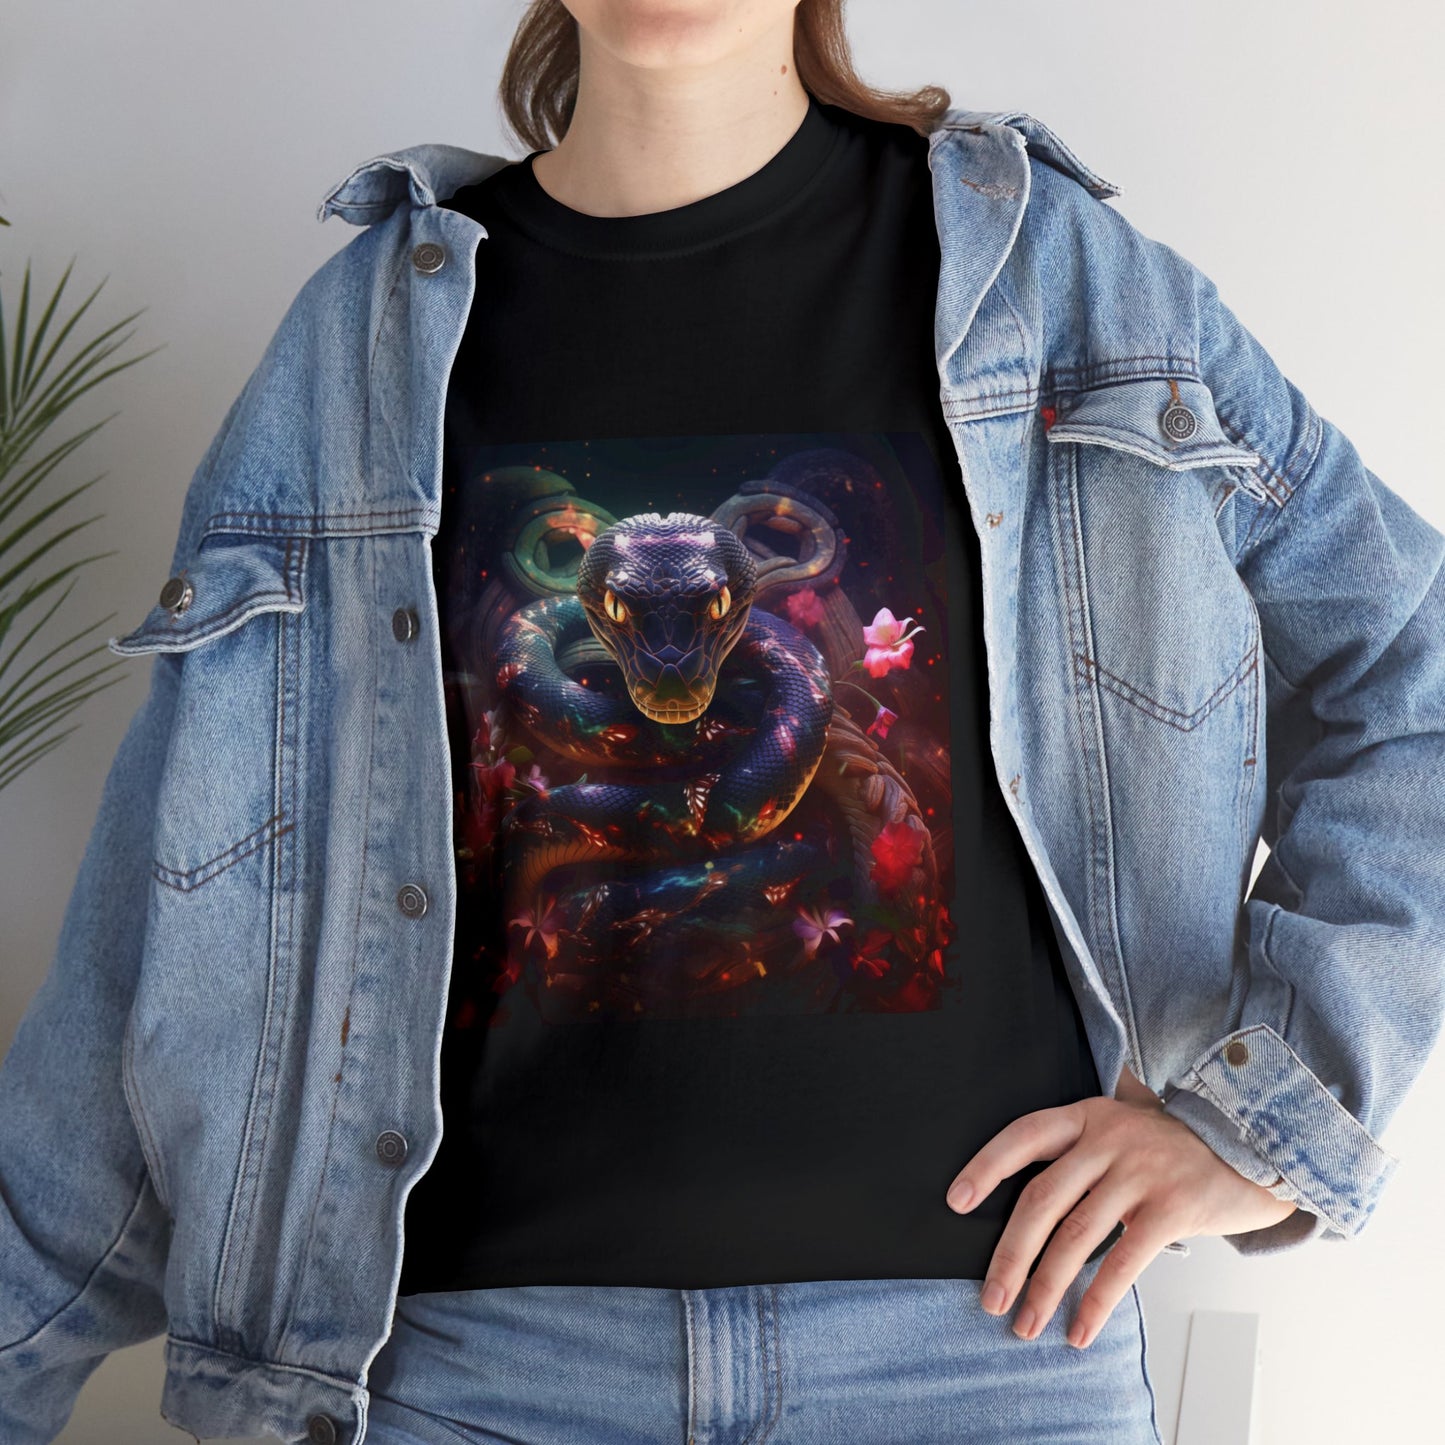 Ayahuasca Queen of the Forest - Unisex Cotton Tee